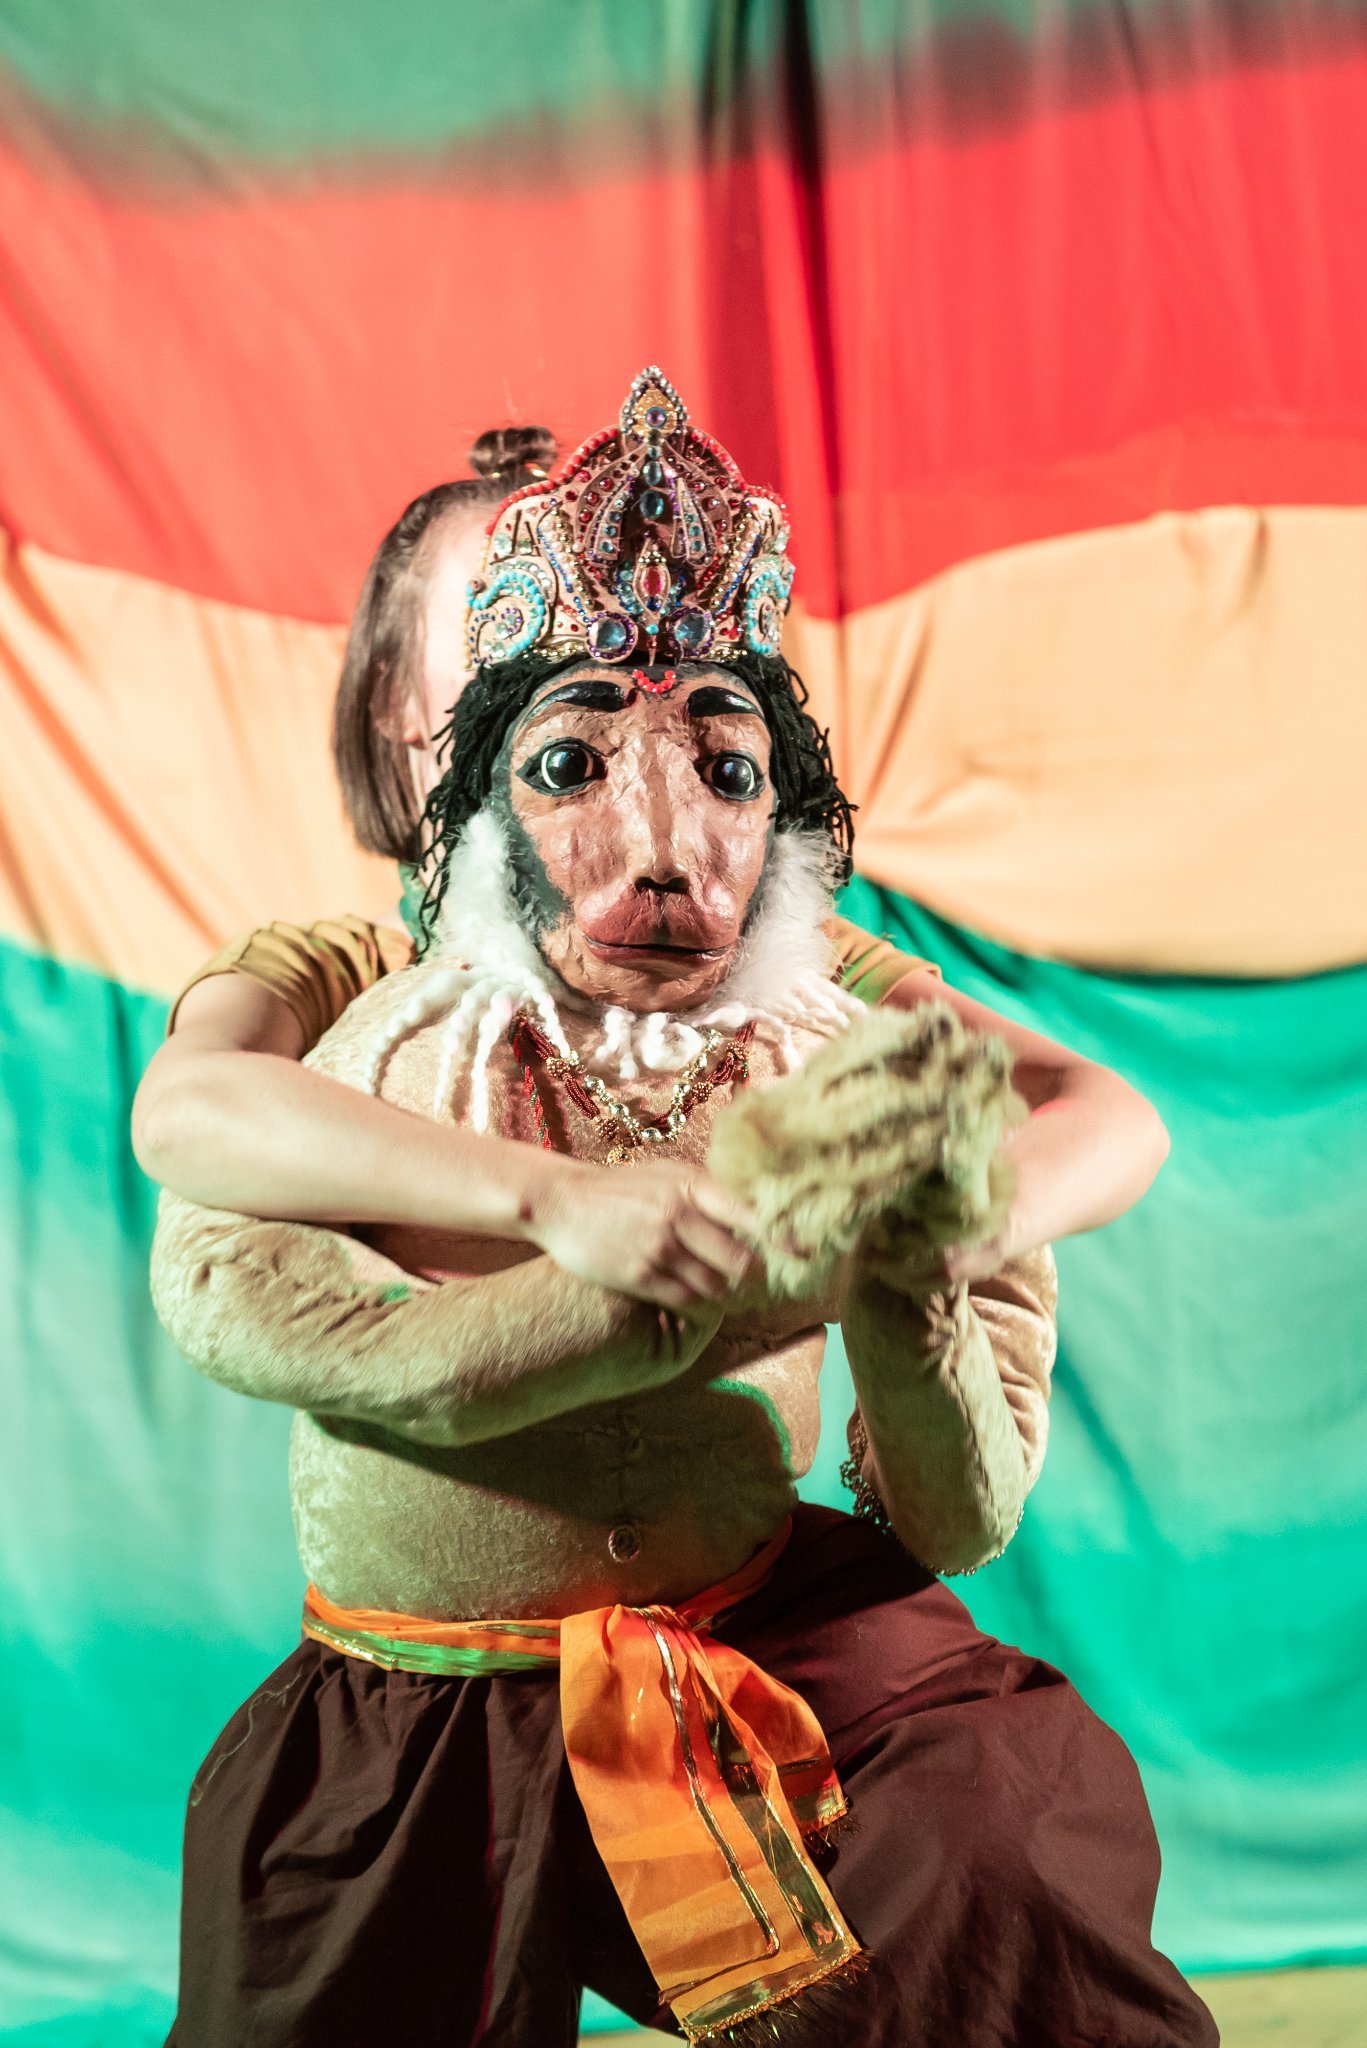 Puppetry, Storytelling, Kathak, Tabla...Epic Hanuman stories through interactive theatre for the whole family 🐵
https://t.co/SLQ8T5H7N8